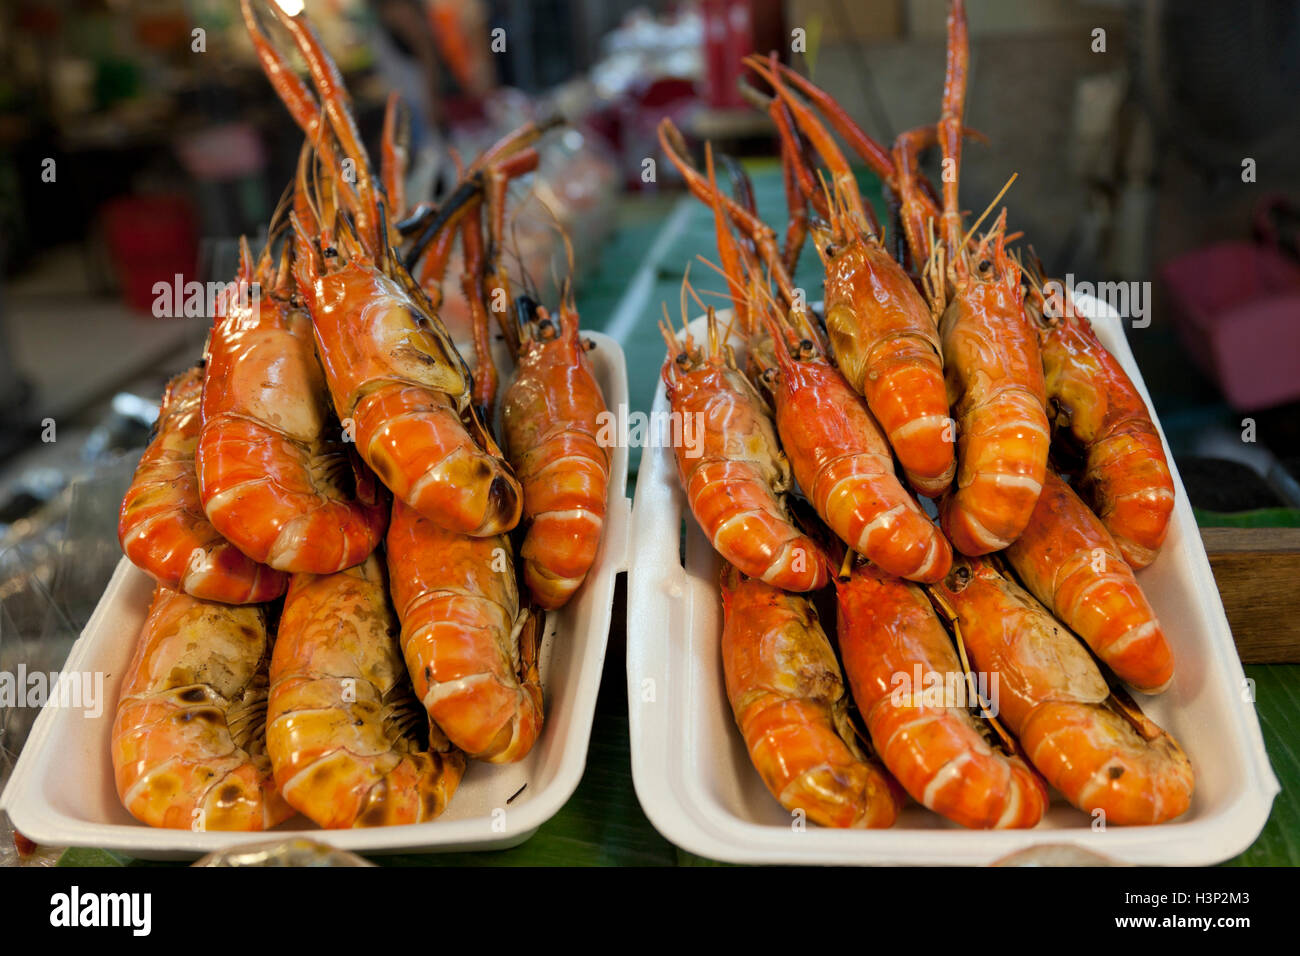 Barbecued or grilled black tiger prawns for sale in styrofoam containers at Or Tor Gor market in Bangkok. Stock Photo